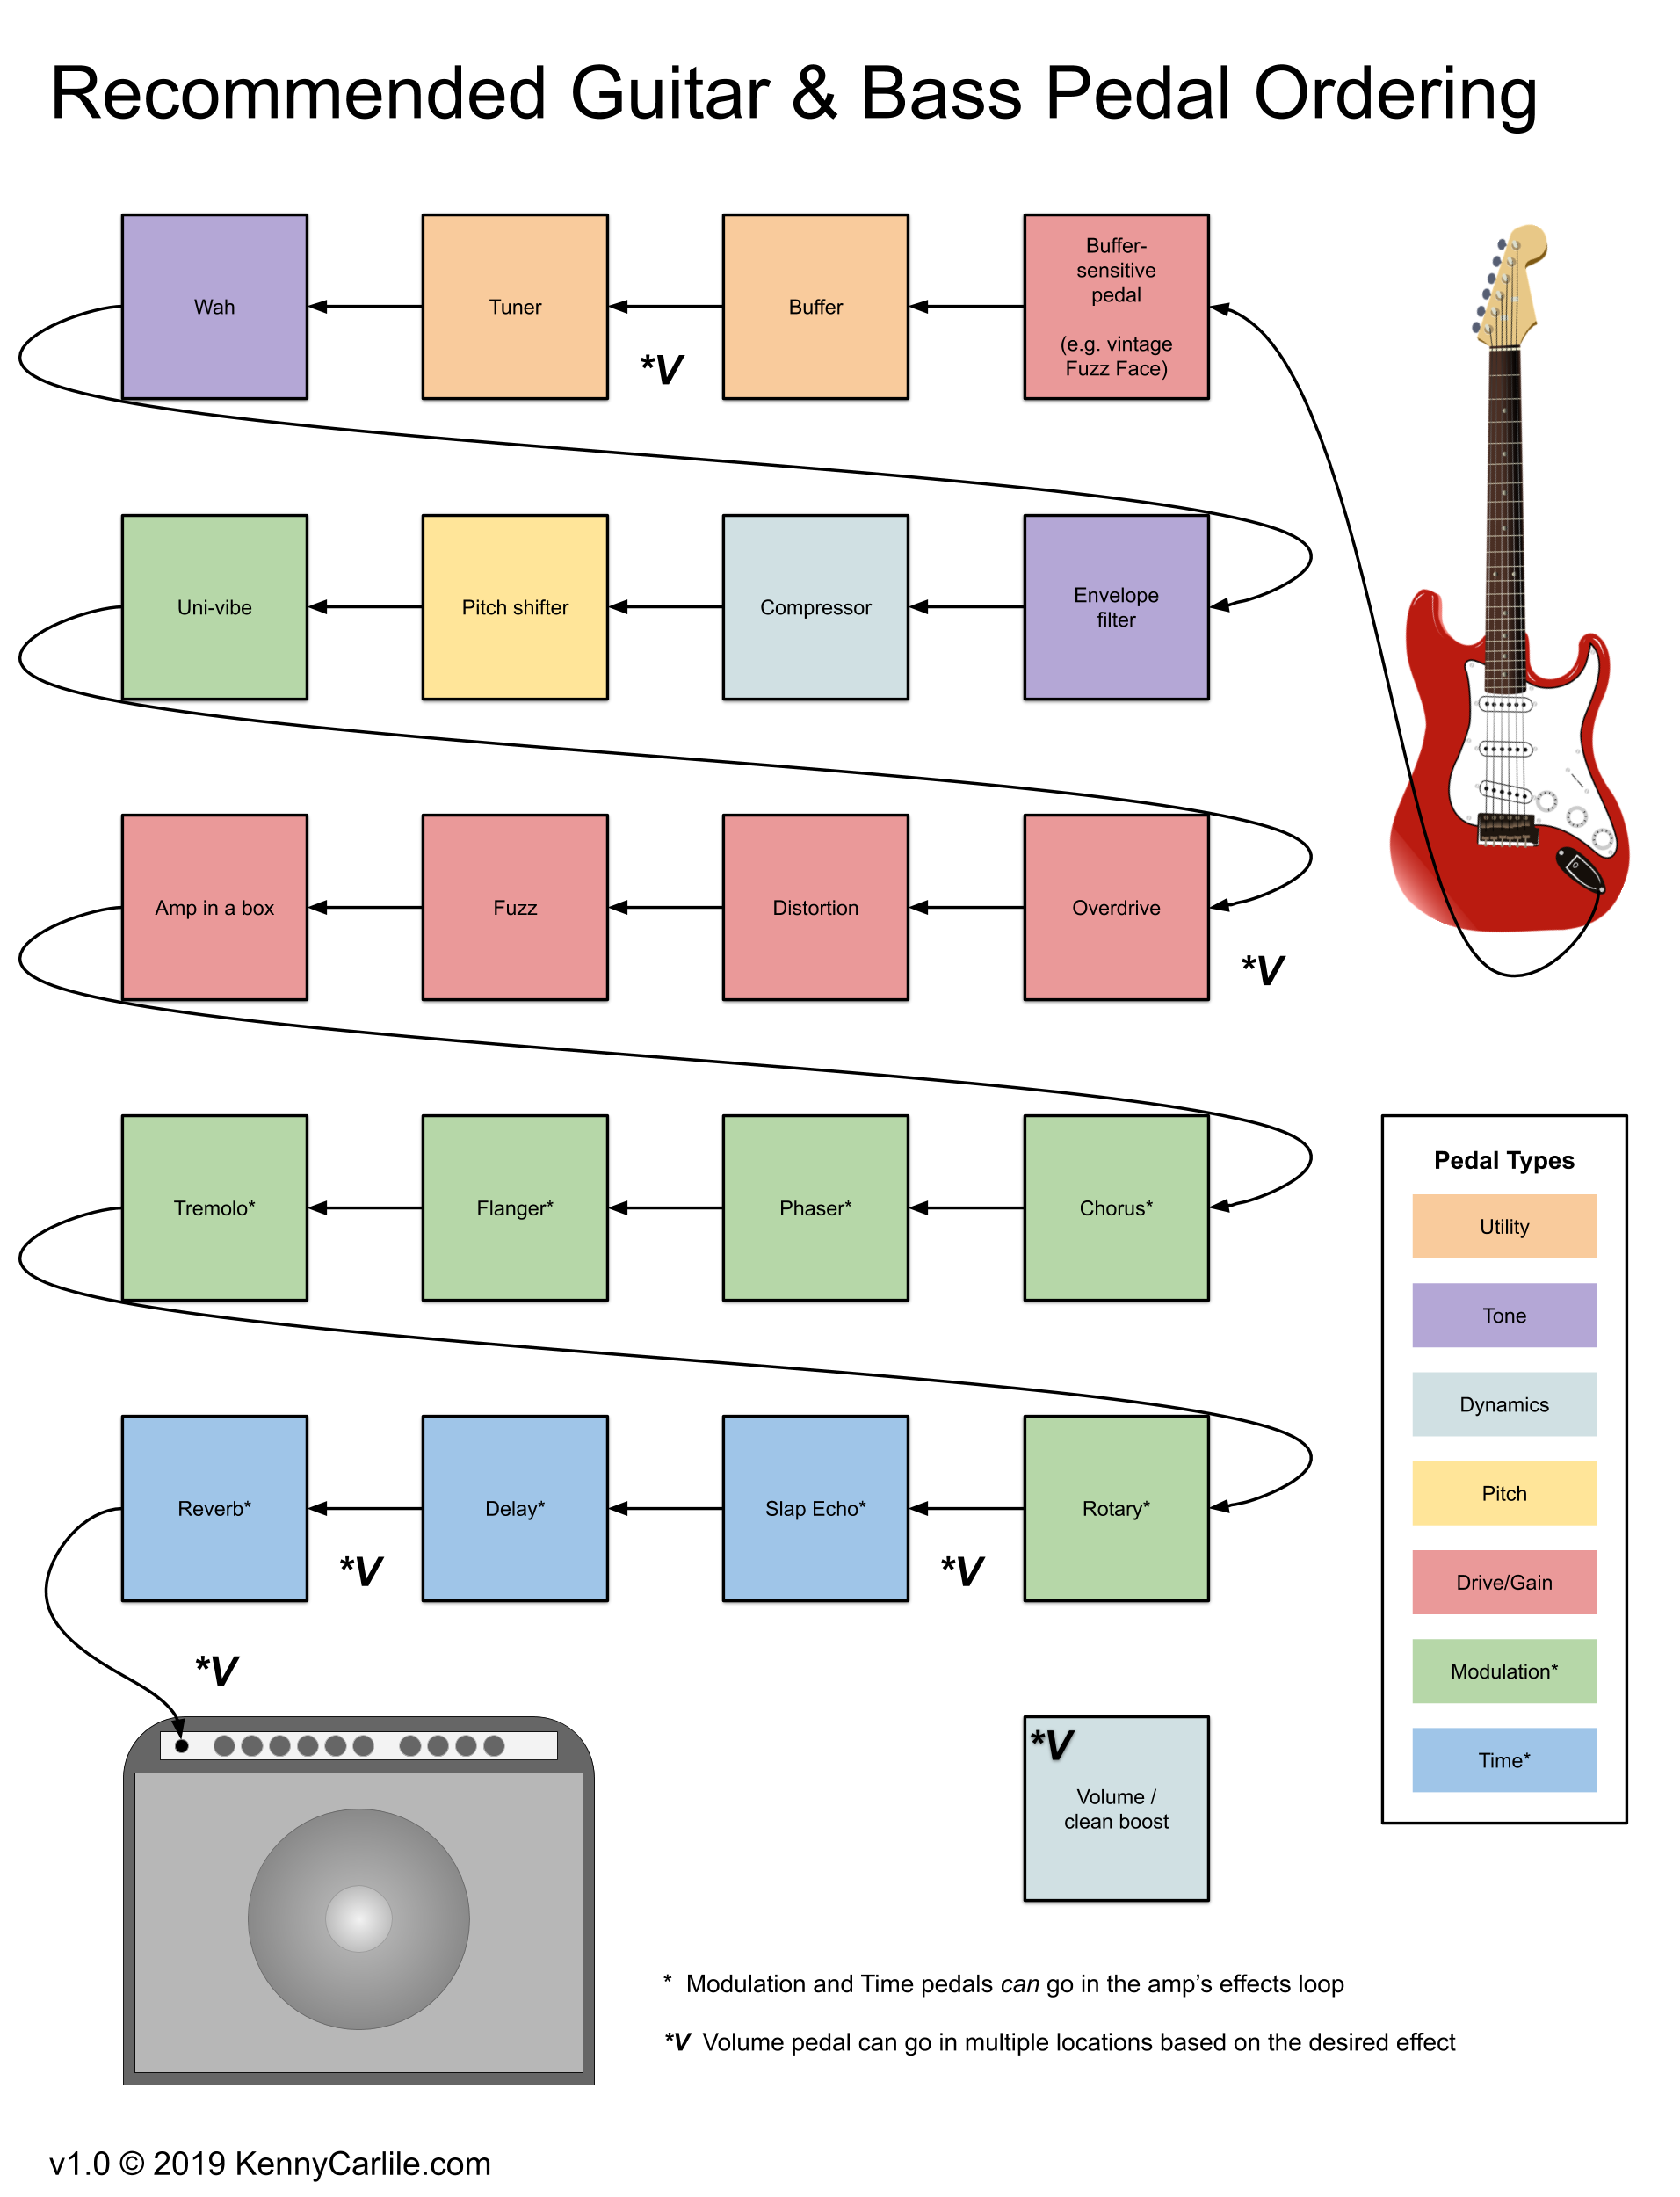 Recommended Guitar and Bass Pedal Ordering